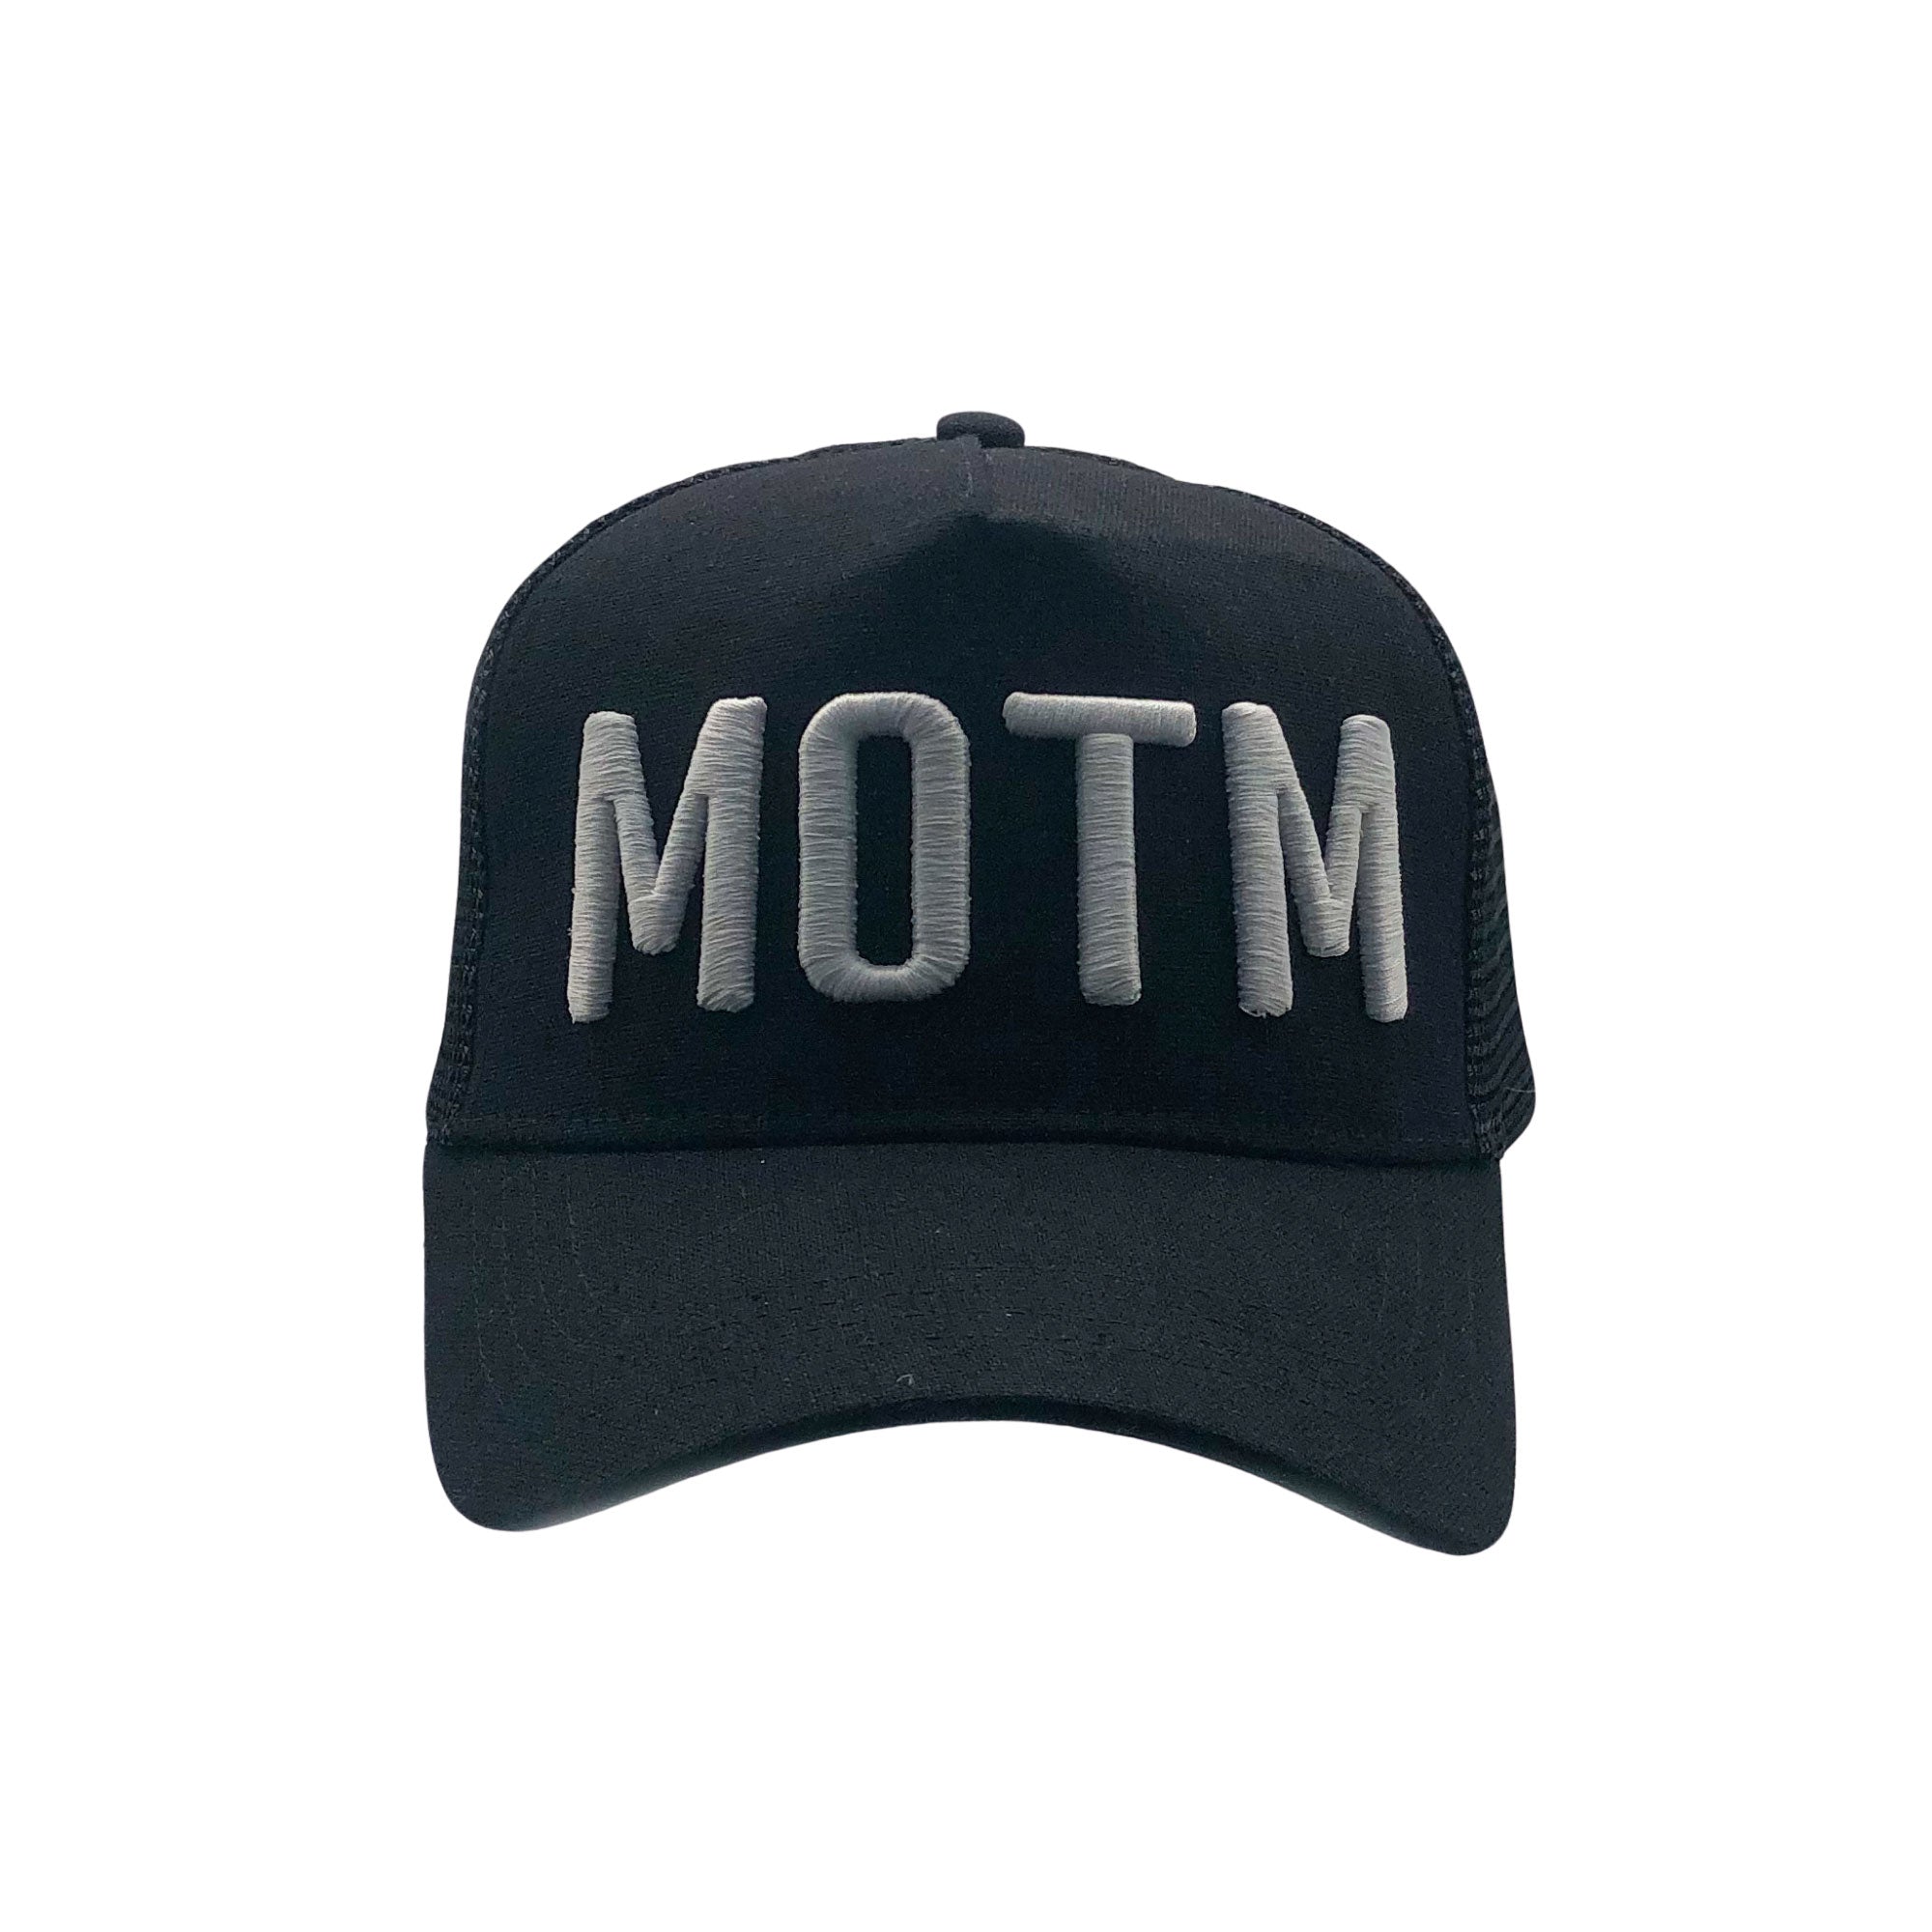 MAN OF THE MATCH® Roberto Carlos Official Cap - MOTM 3D Embroidered White on Black - Premium Linen